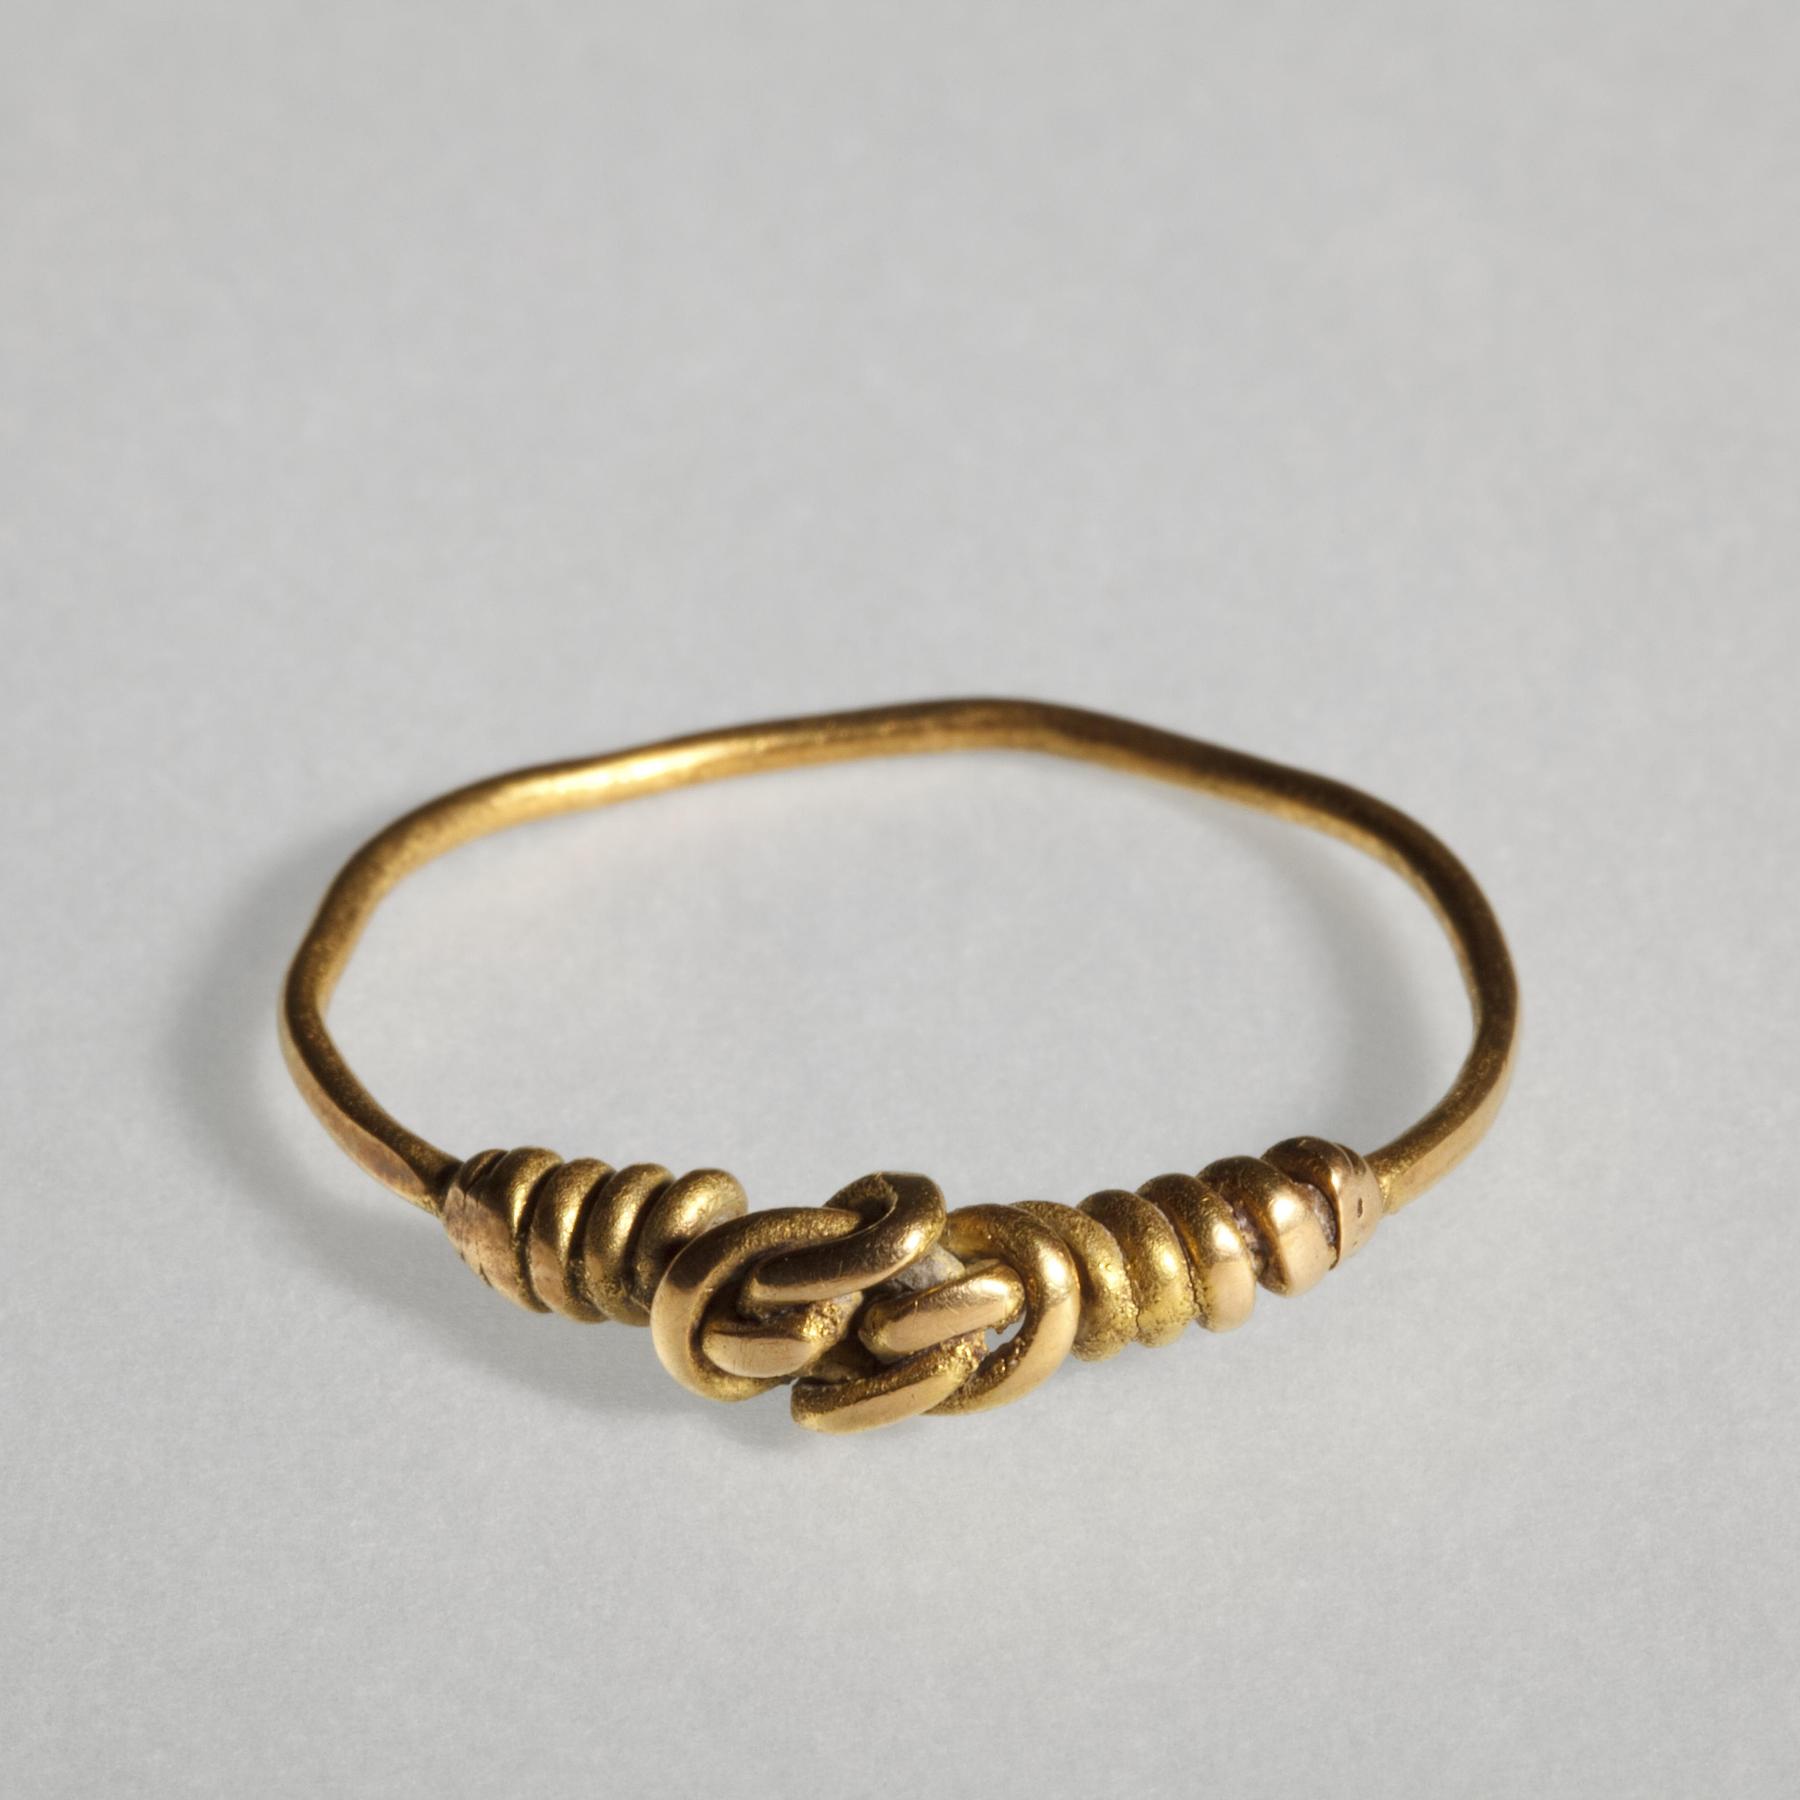 Finger ring with knot-shaped link, H1808